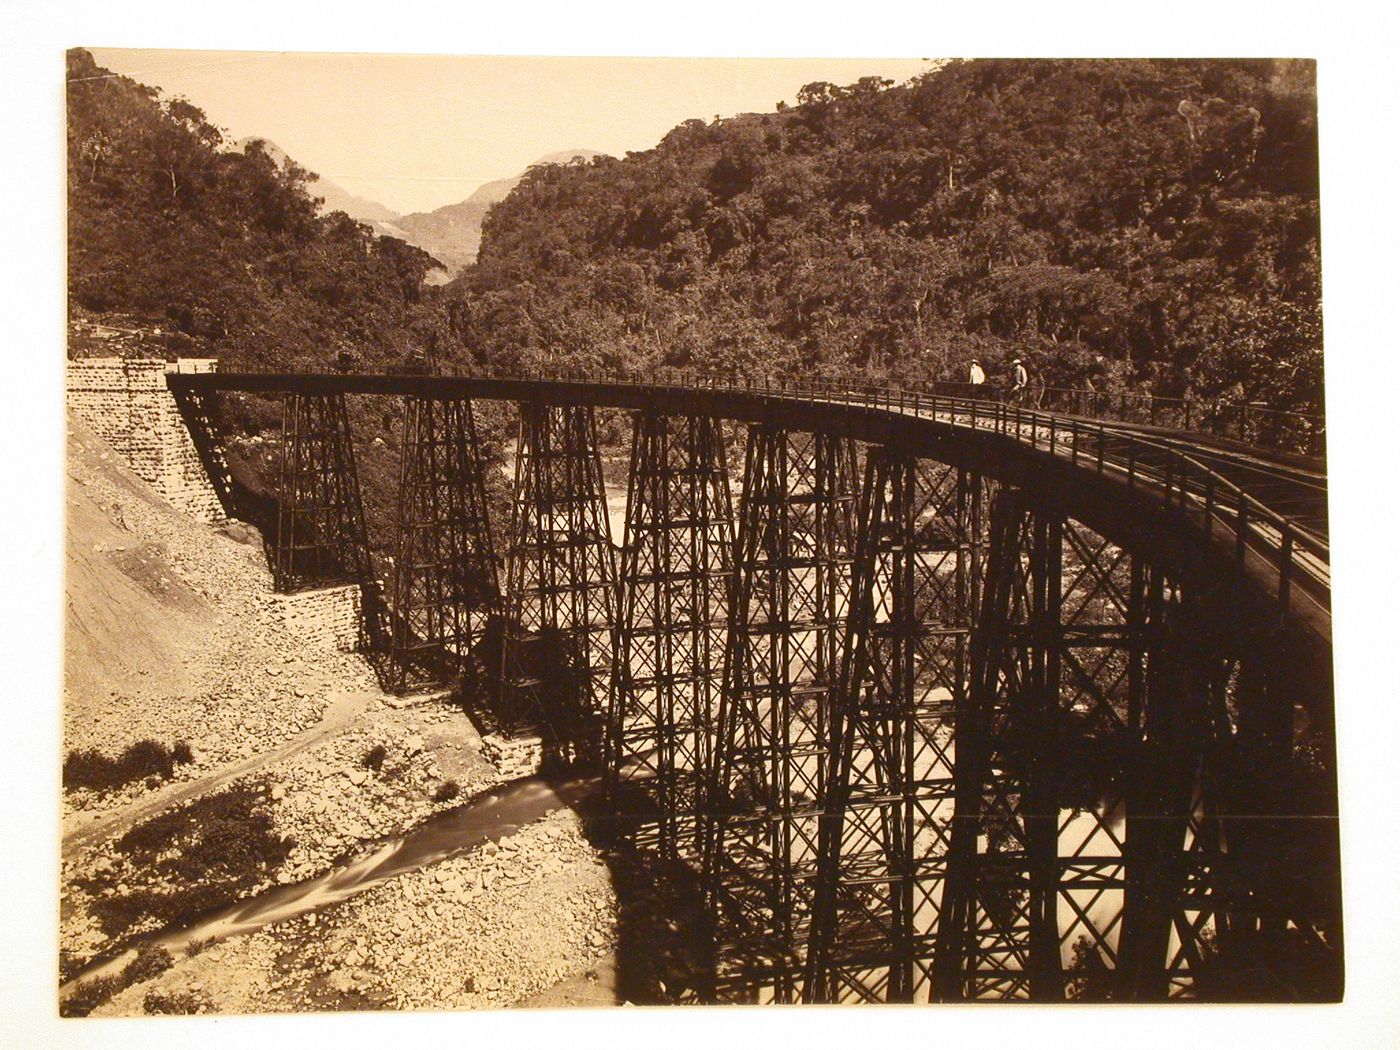 View of the railroad bridge over the Metlac Ravine with two men leaning on the railing, Veracruz-Llave, Mexico